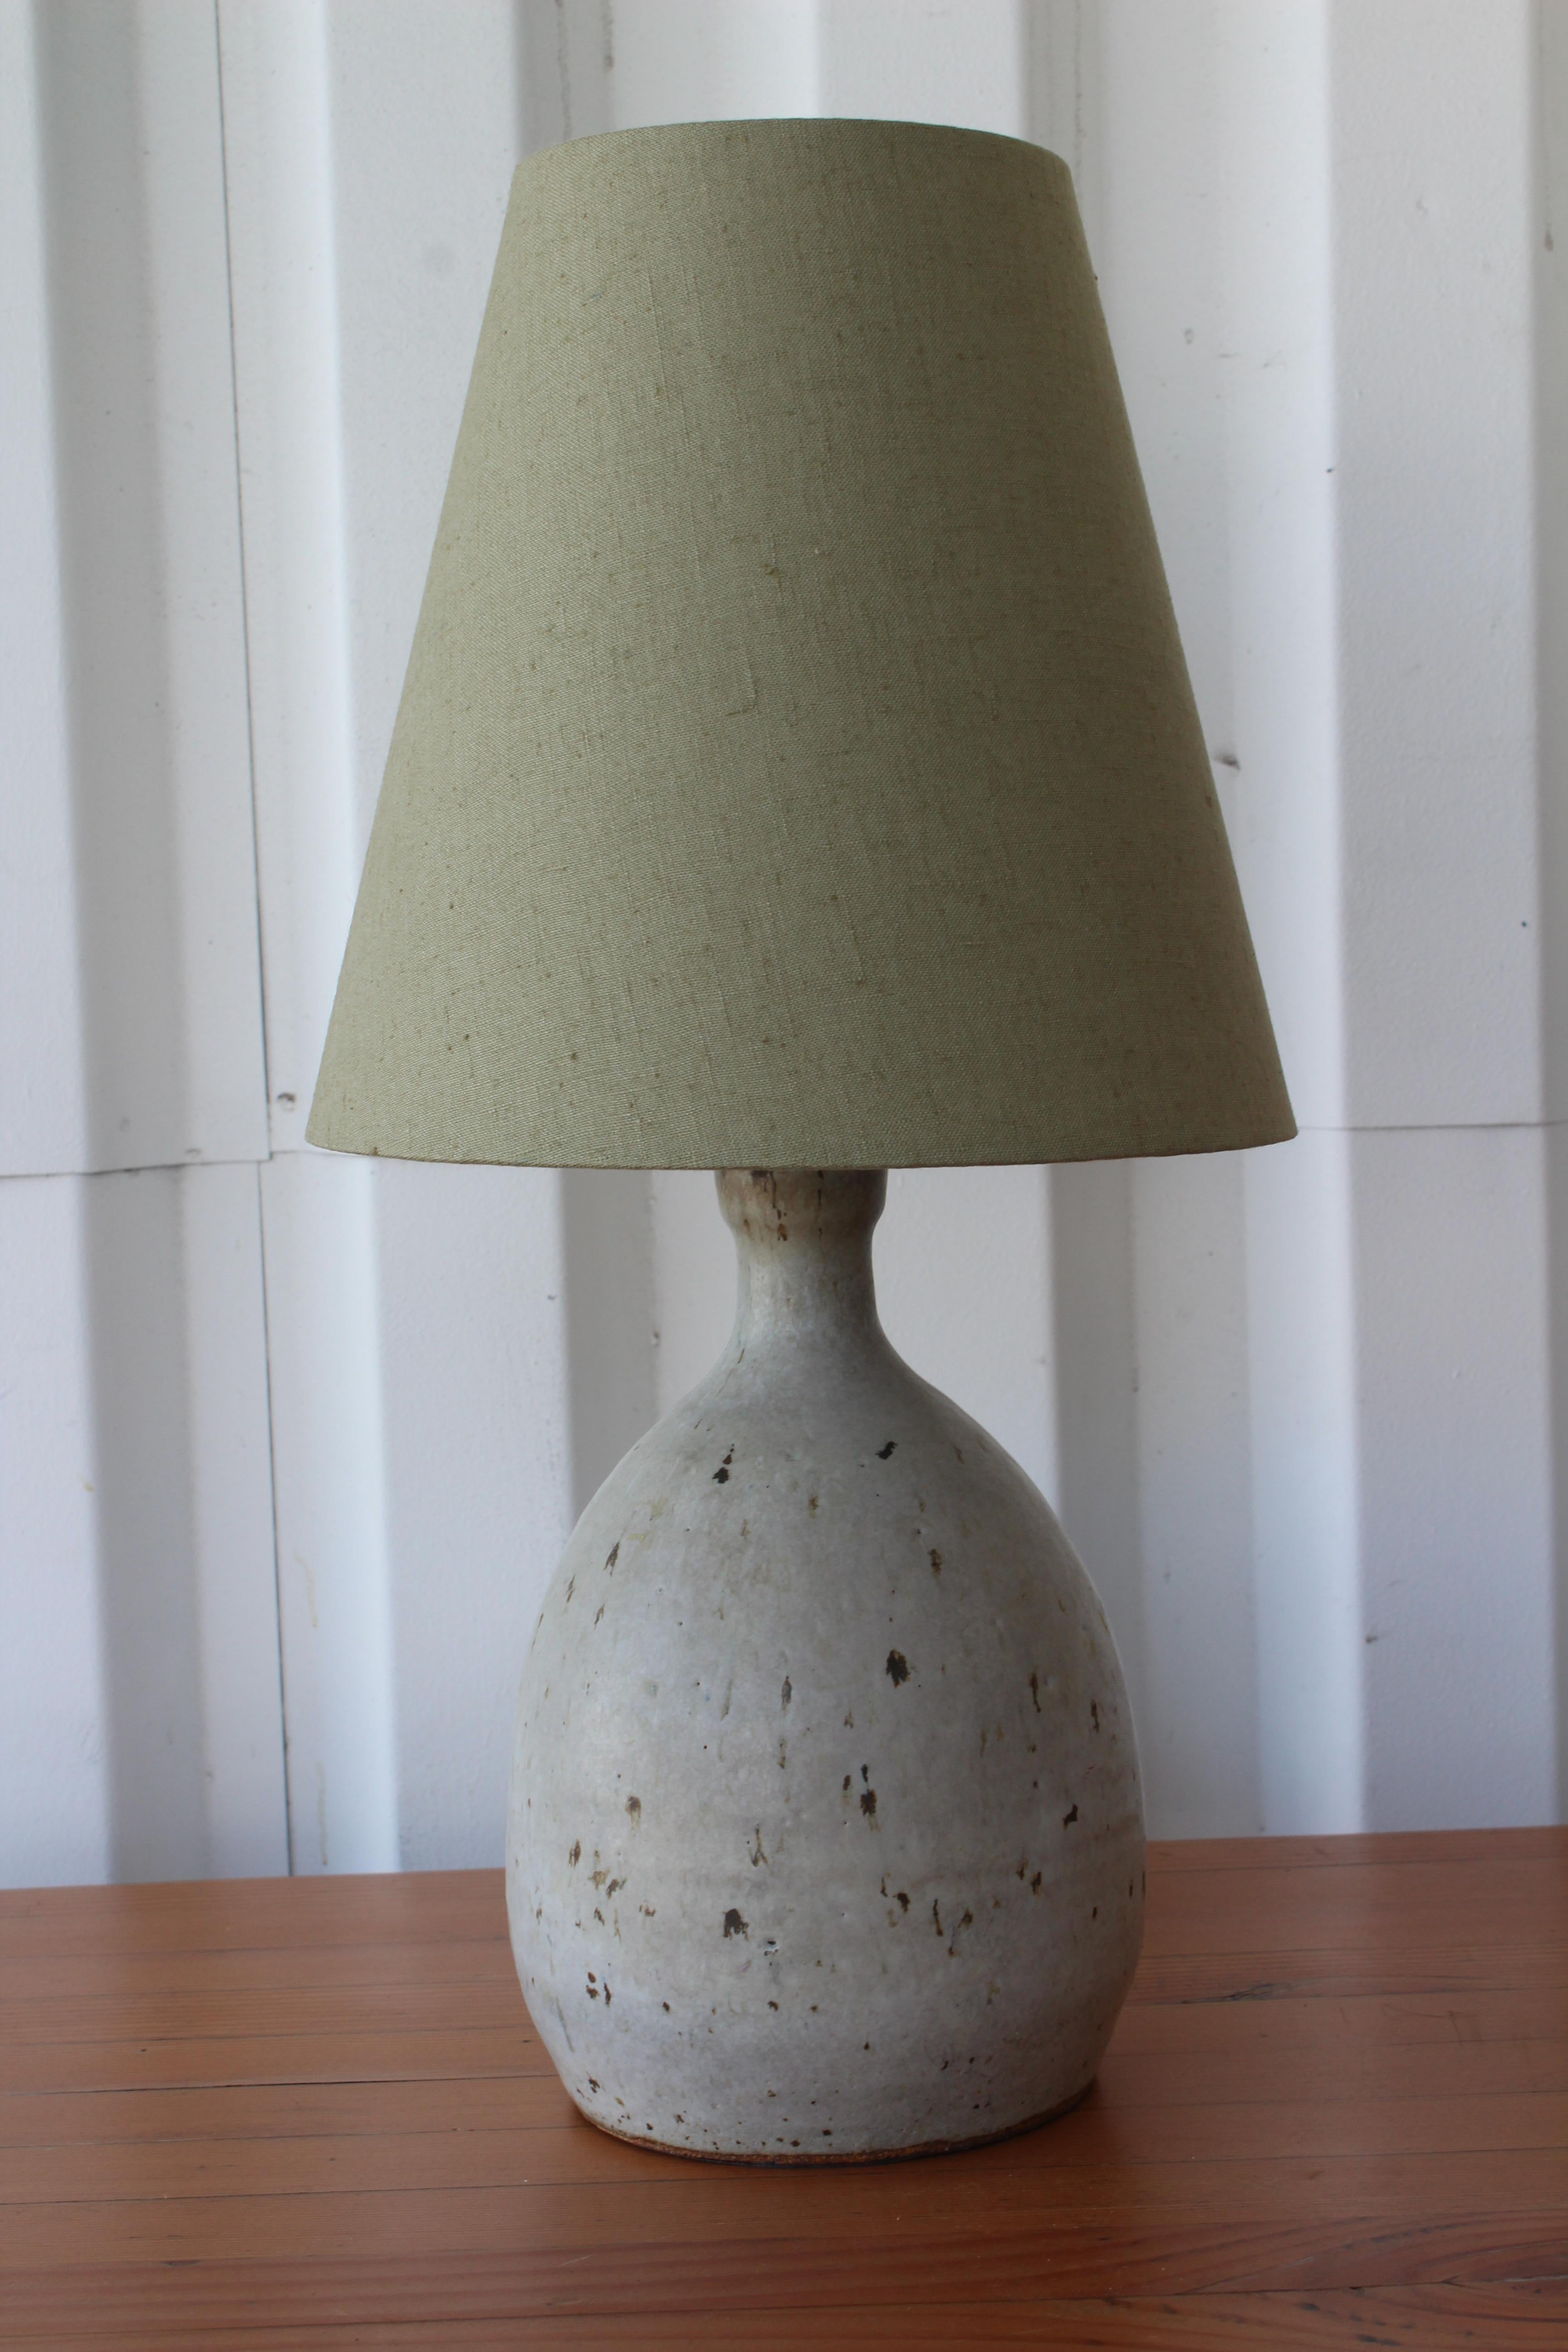 Petite 1960s studio pottery lamp. Newly rewired and fitted with a custom made lamp shade in olive green linen. 18